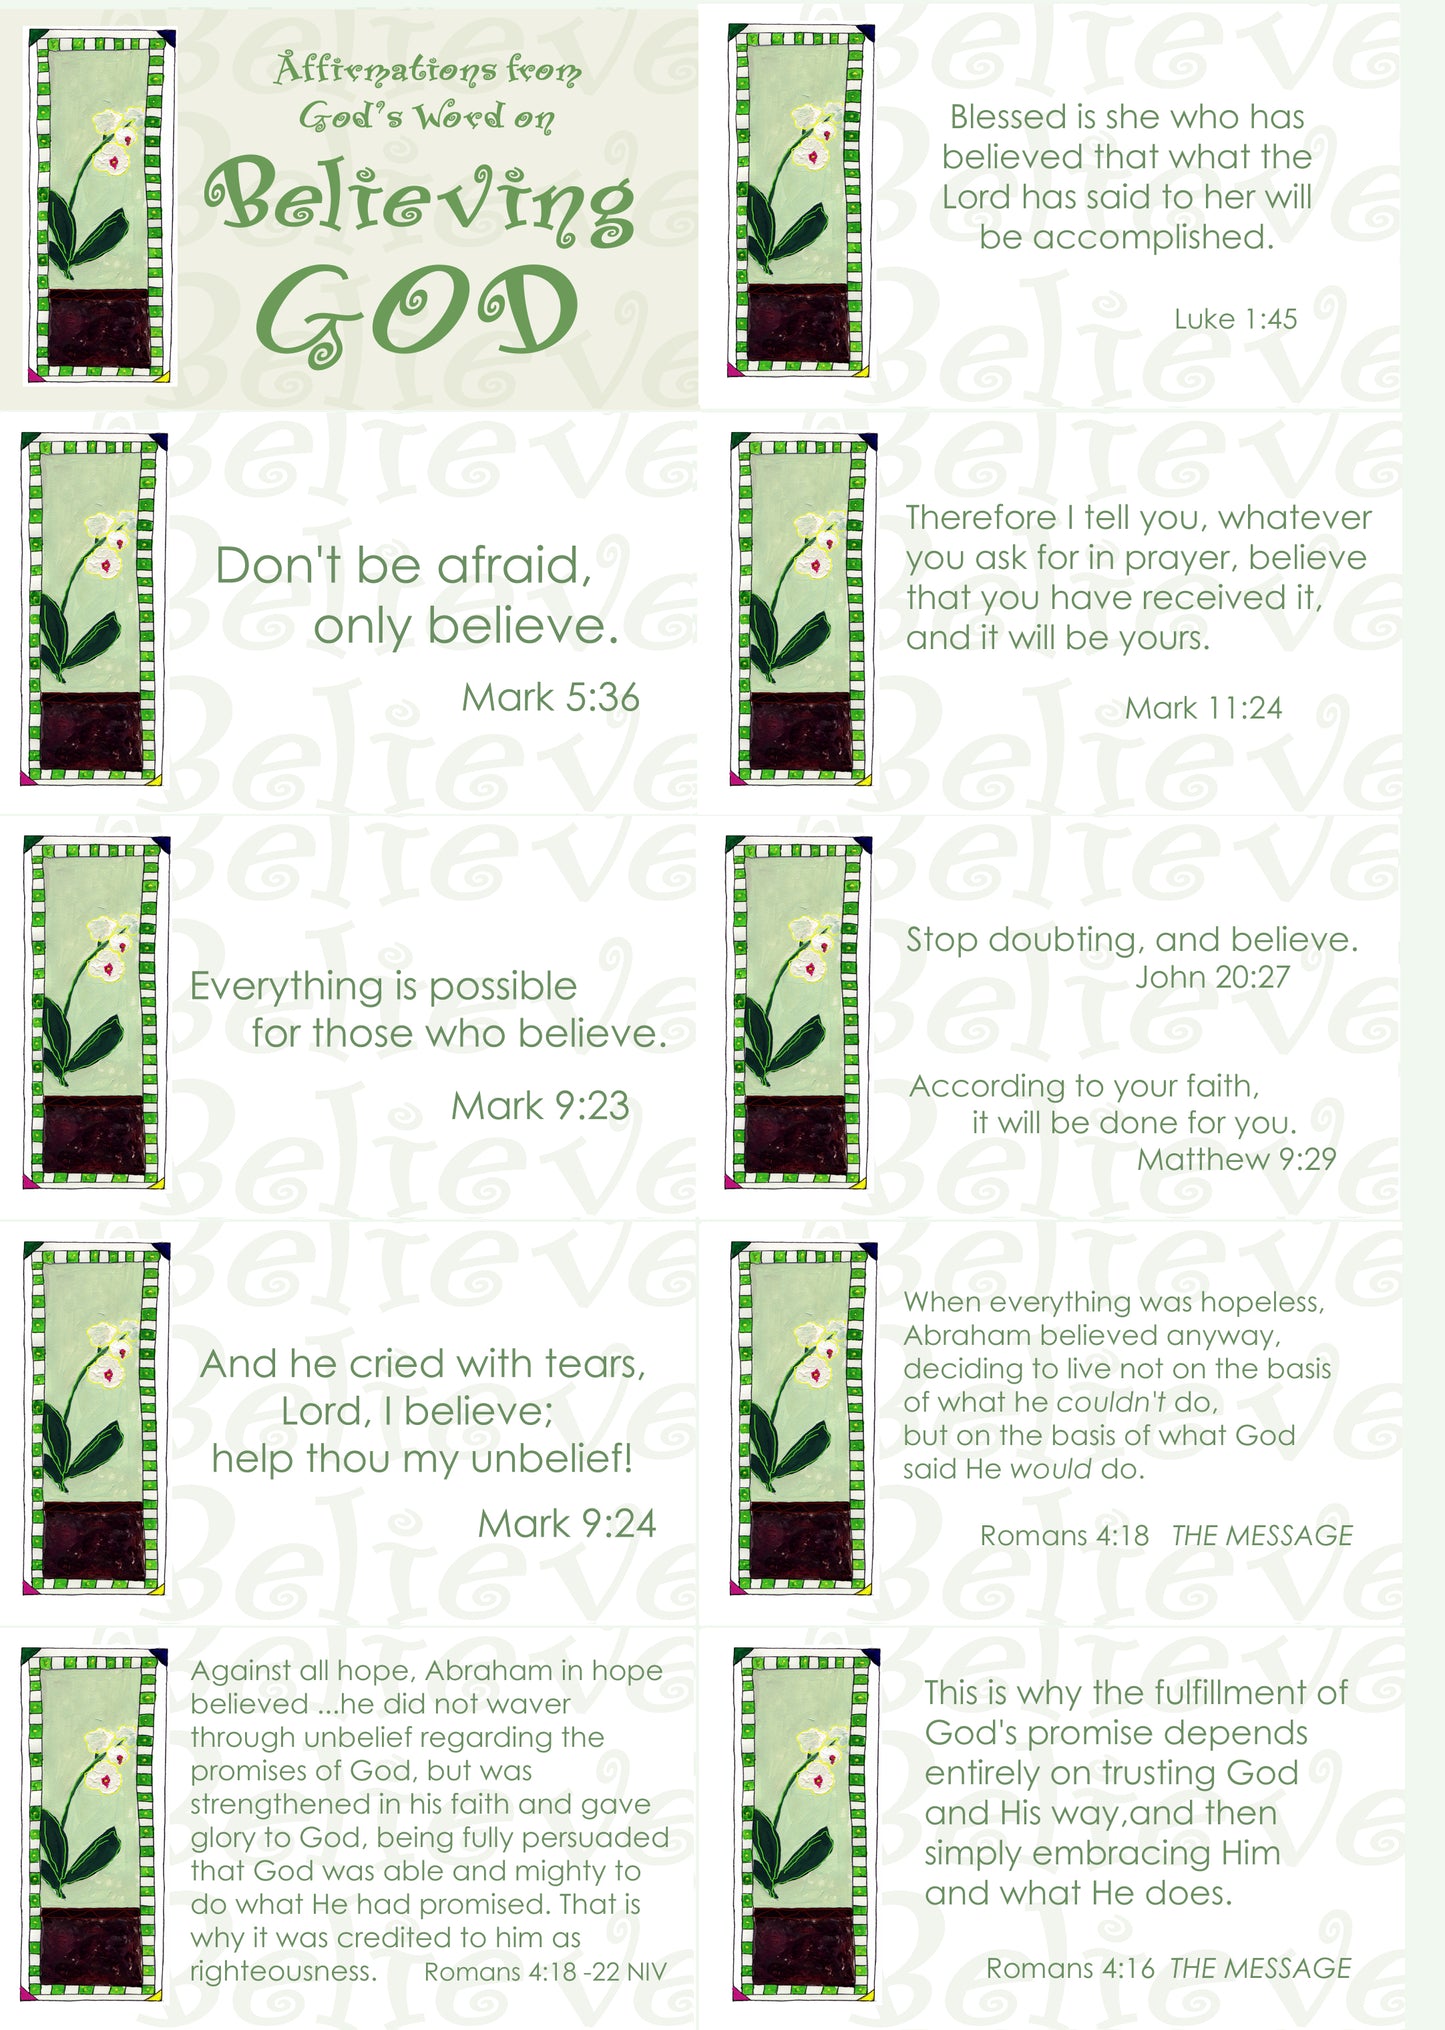 Affirmations from God - Believing God